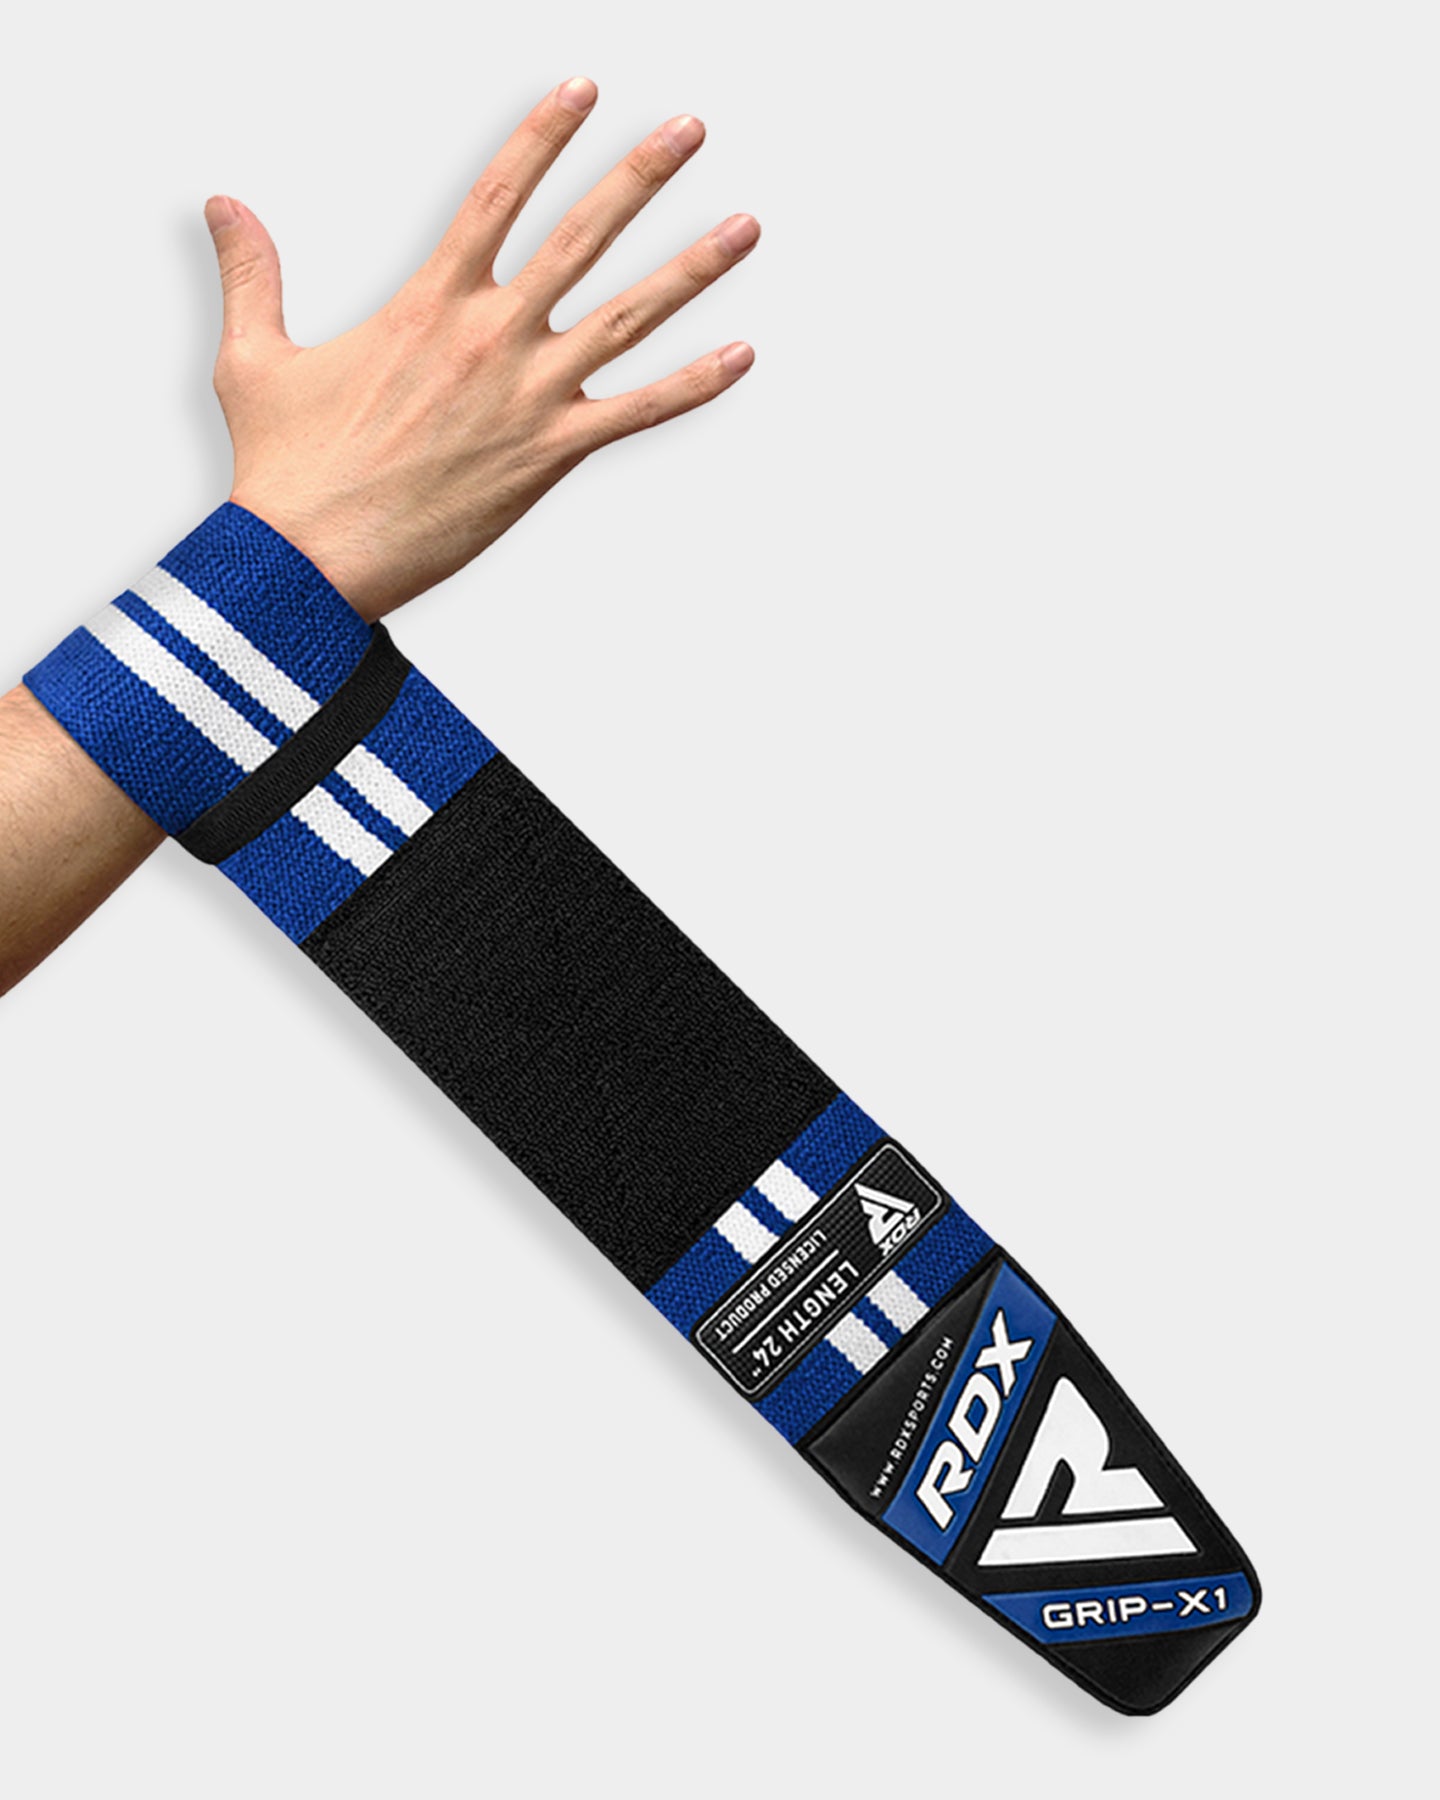 RDX Sports W4 Wrist Support Wraps For Weight Lifting, M - 24", Blue A3